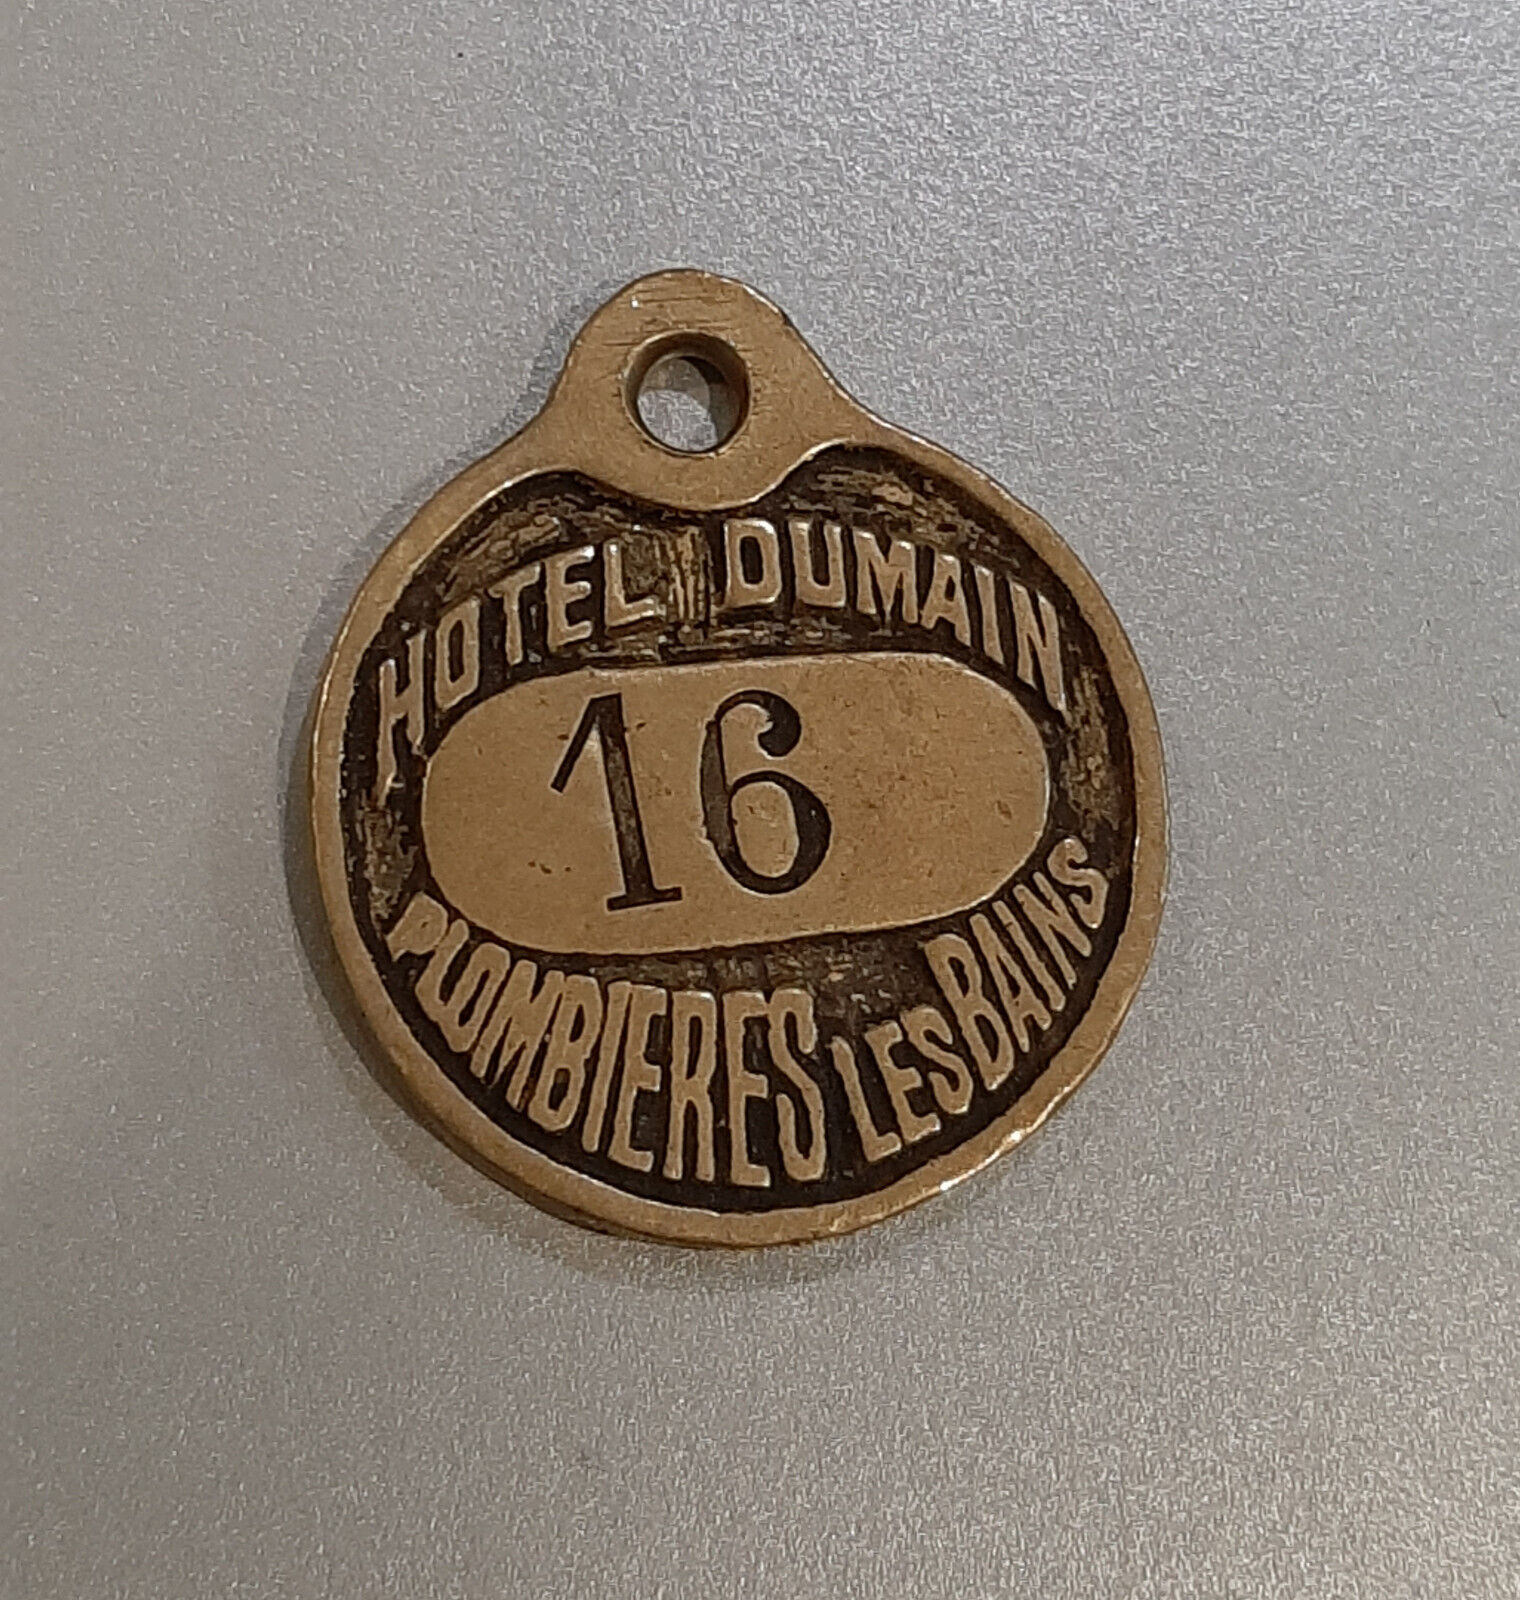 Vintage/Antique French Hotel Key Fob Hotel Dumain Plumbieres Les Bains No. 16